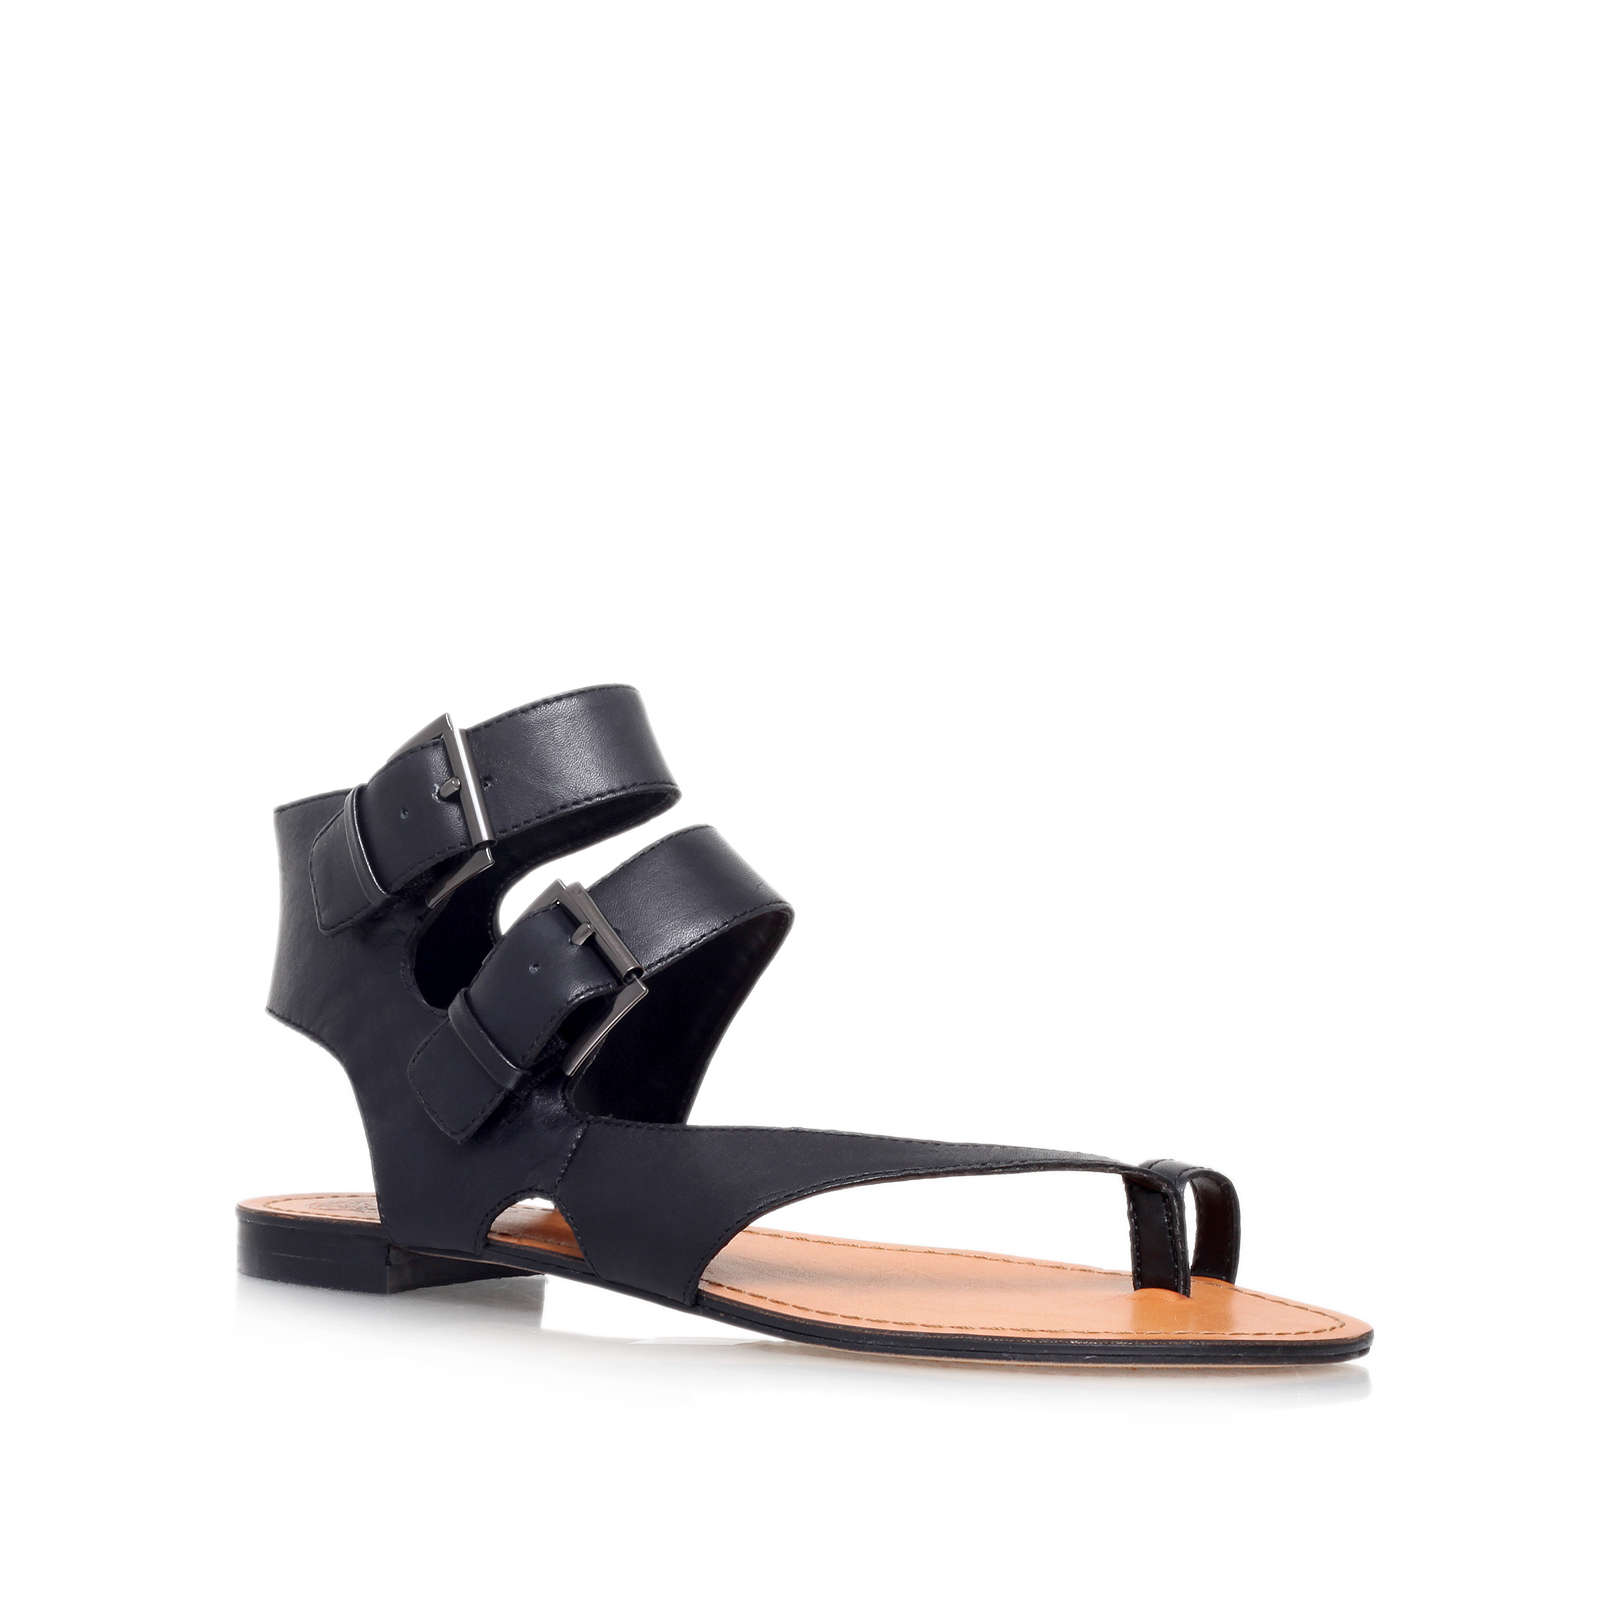 Vince Camuto | MOVERZ Black Flat Sandals by VINCE CAMUTO